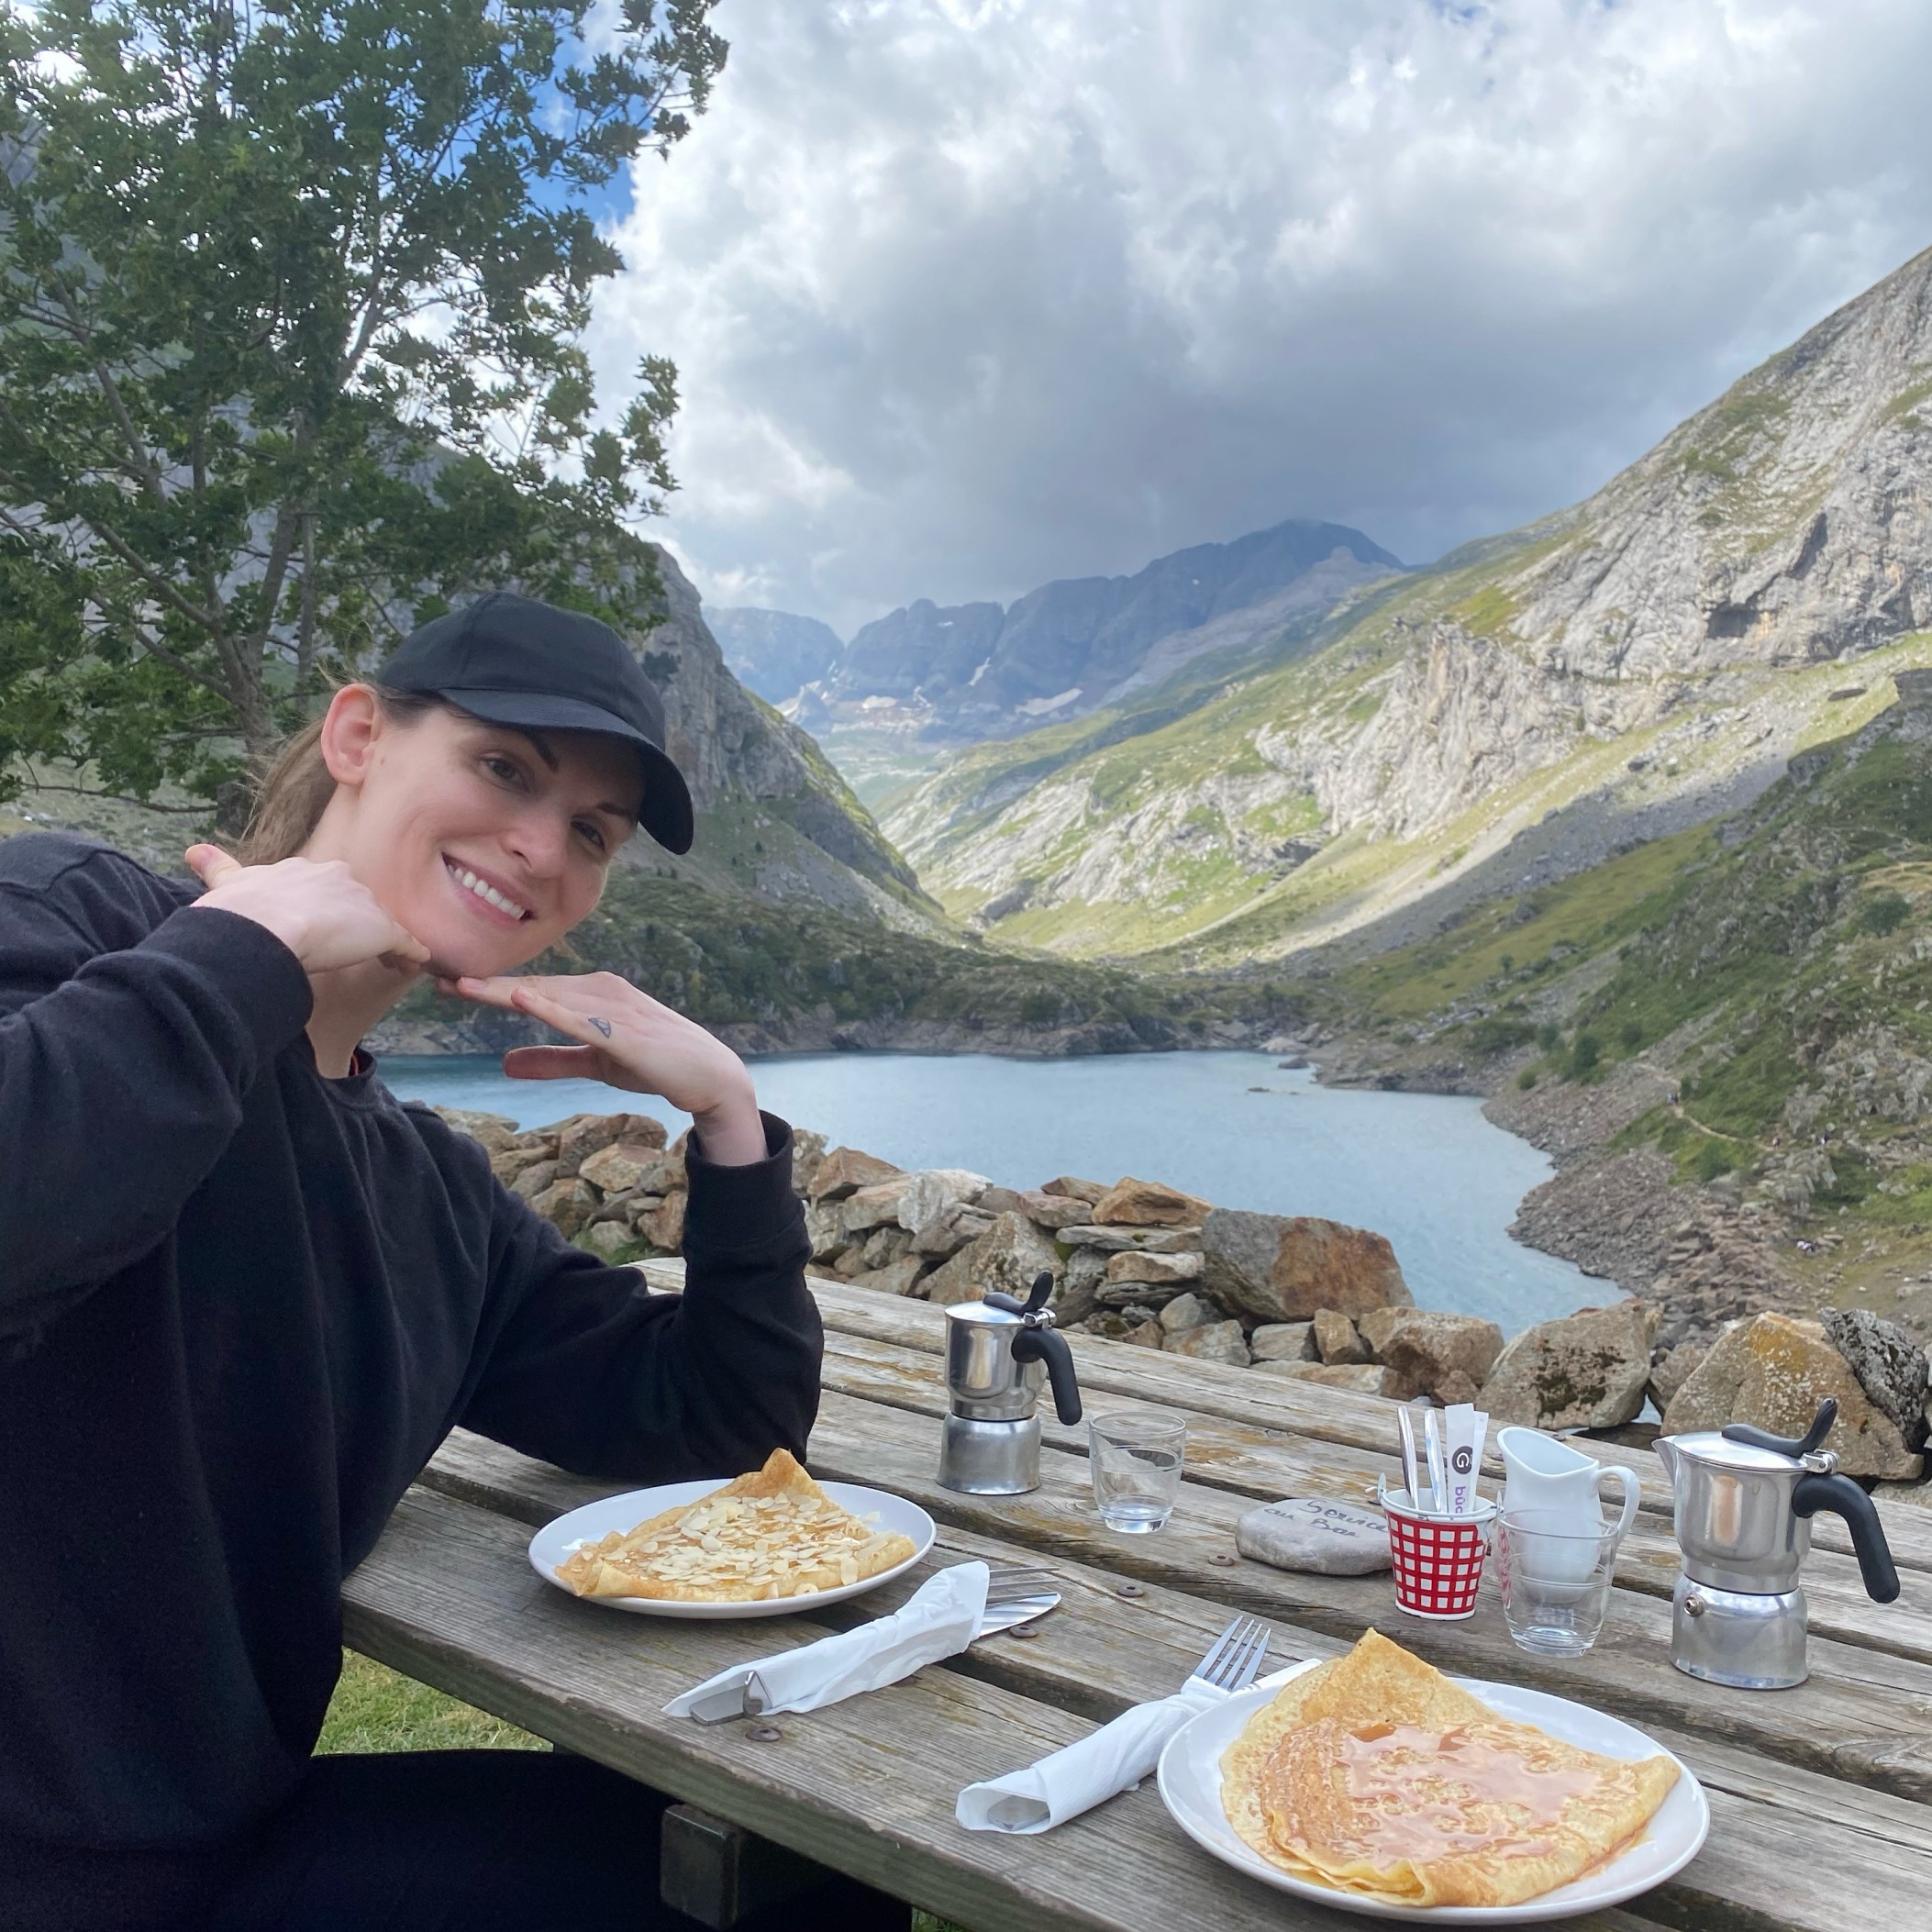 Enjoying crepes after a hike in the Pyrenees